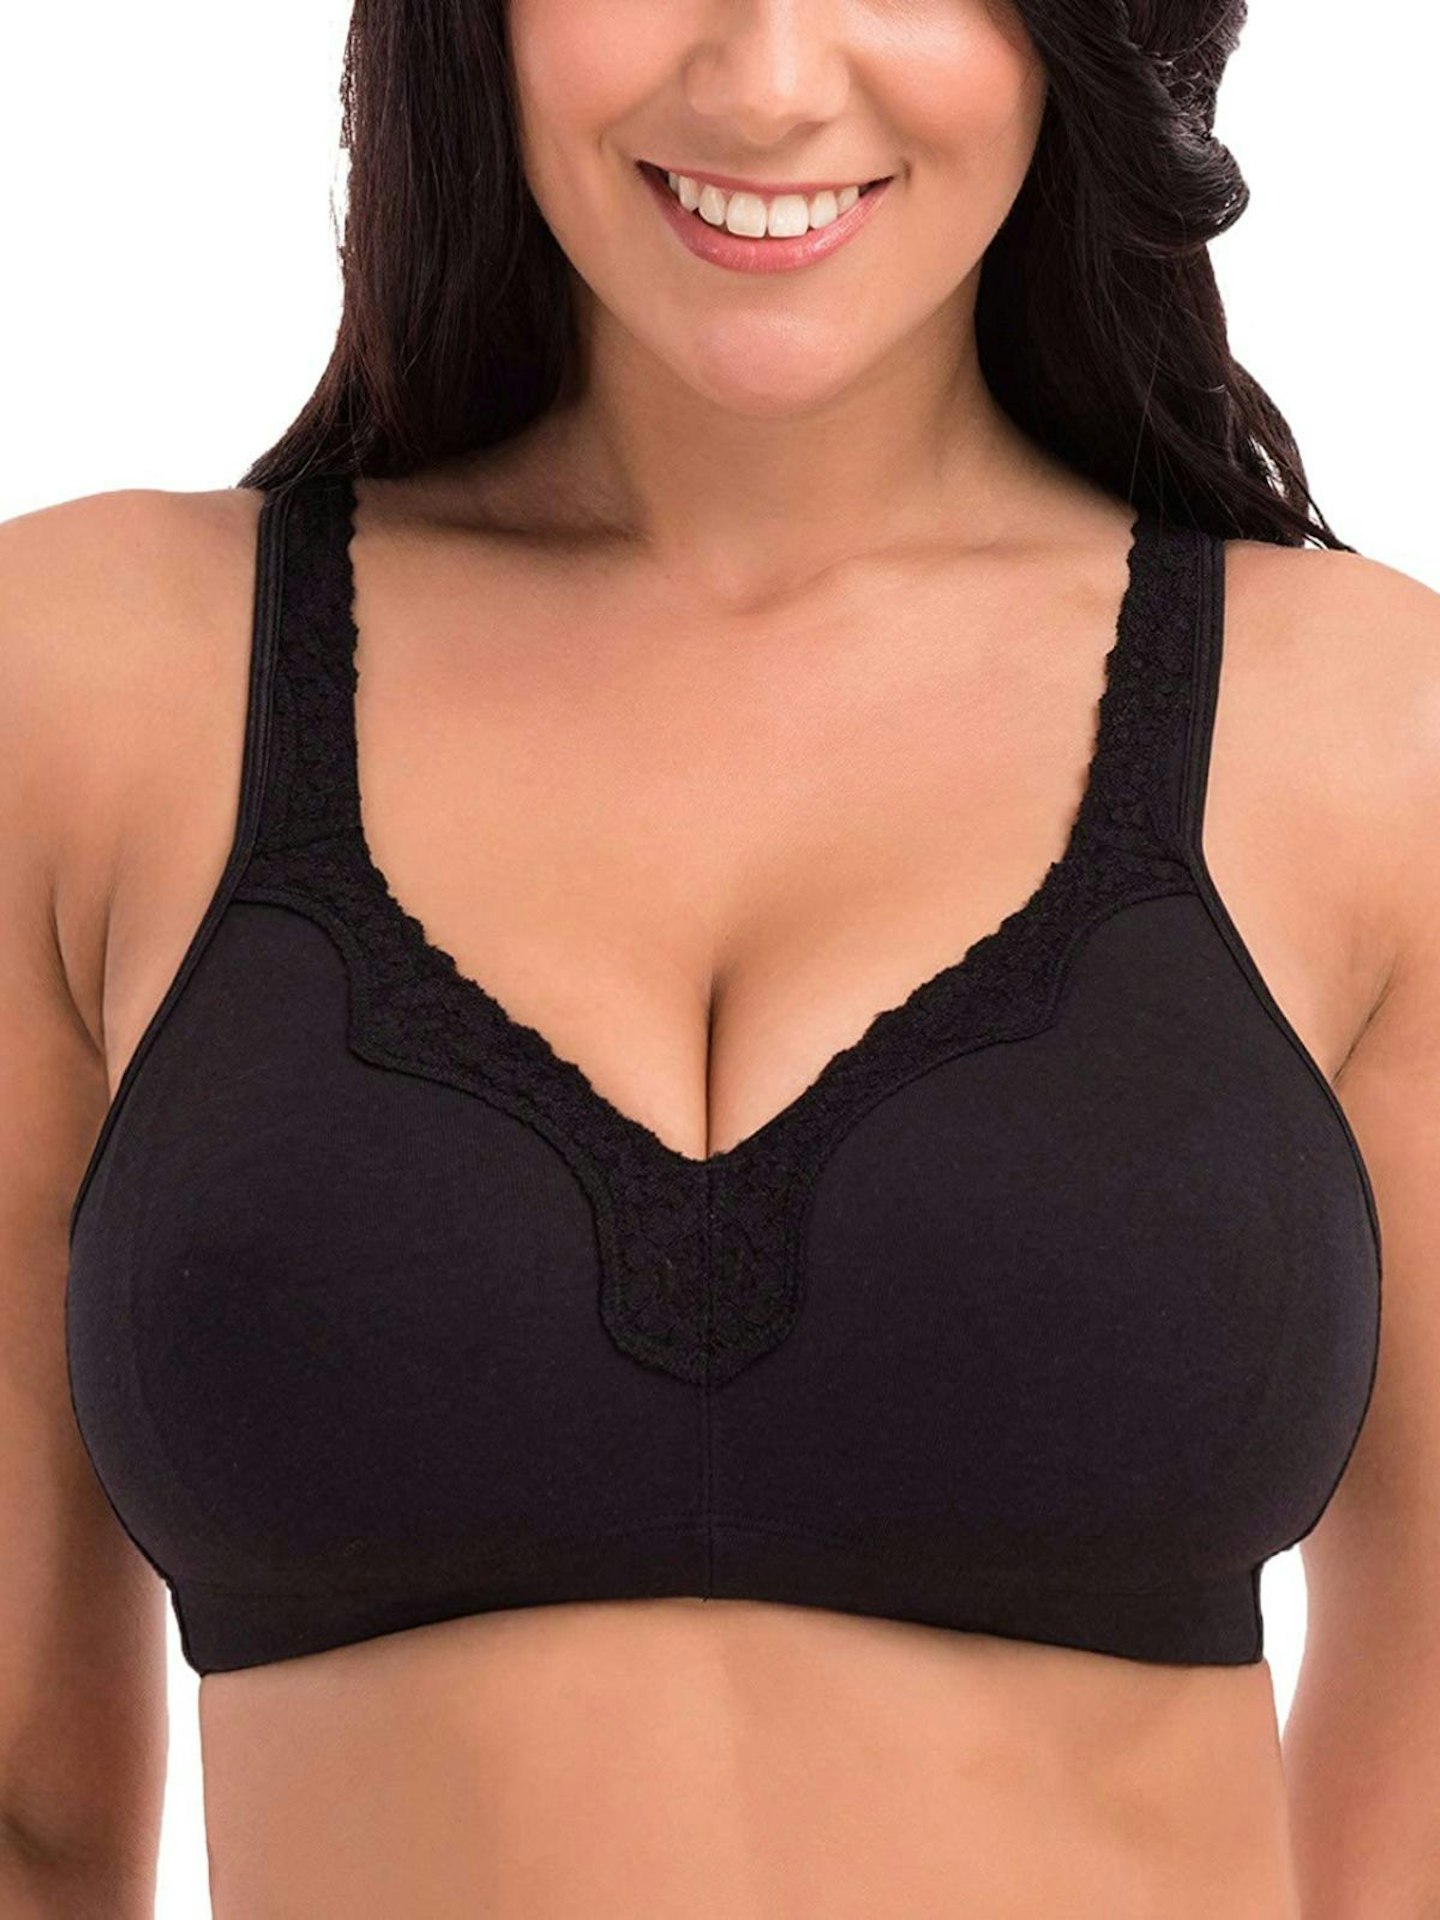 Woman shares genius hack for making any bra backless